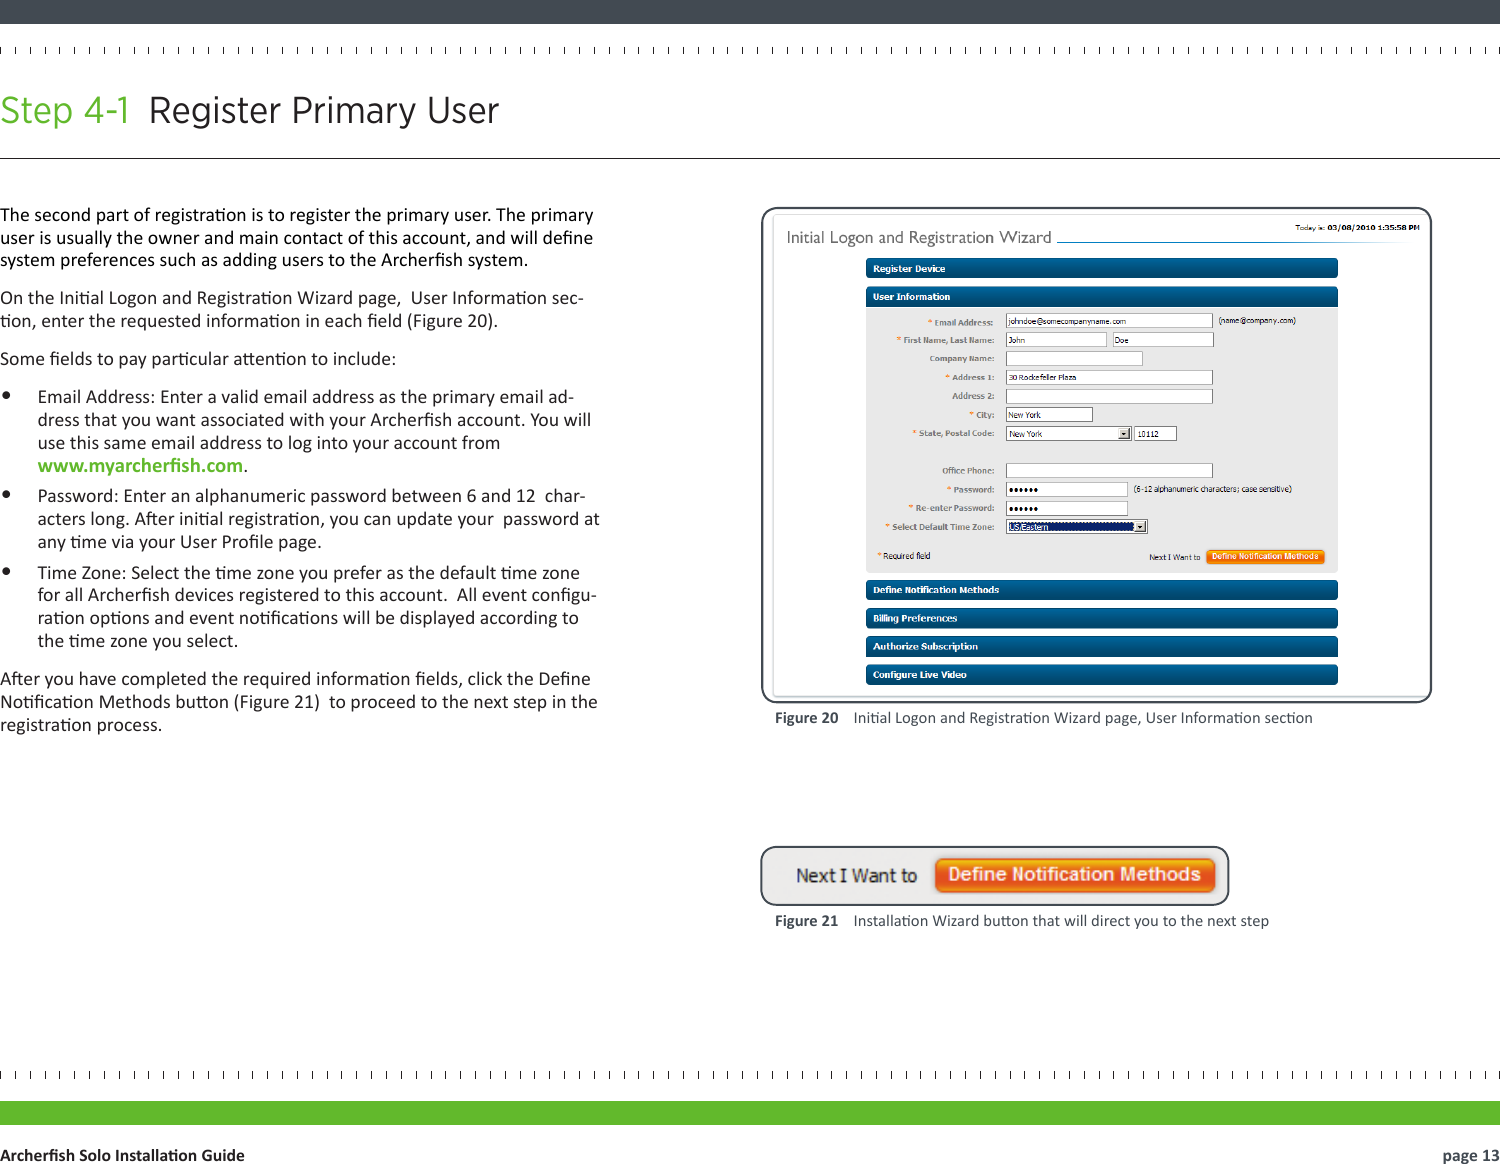 The second part of registraon is to register the primary user. The primary user is usually the owner and main contact of this account, and will dene system preferences such as adding users to the Archersh system.On the Inial Logon and Registraon Wizard page,  User Informaon sec-on, enter the requested informaon in each eld (Figure 20).Some elds to pay parcular aenon to include:•  Email Address: Enter a valid email address as the primary email ad-dress that you want associated with your Archersh account. You will use this same email address to log into your account from  www.myarchersh.com.•  Password: Enter an alphanumeric password between 6 and 12  char-acters long. Aer inial registraon, you can update your  password at any me via your User Prole page.•  Time Zone: Select the me zone you prefer as the default me zone for all Archersh devices registered to this account.  All event congu-raon opons and event nocaons will be displayed according to the me zone you select.Aer you have completed the required informaon elds, click the Dene Nocaon Methods buon (Figure 21)  to proceed to the next step in the registraon process.Step 4-1  Register Primary User  page 13Archersh Solo Installaon GuideFigure 21    Installaon Wizard buon that will direct you to the next stepFigure 20    Inial Logon and Registraon Wizard page, User Informaon secon